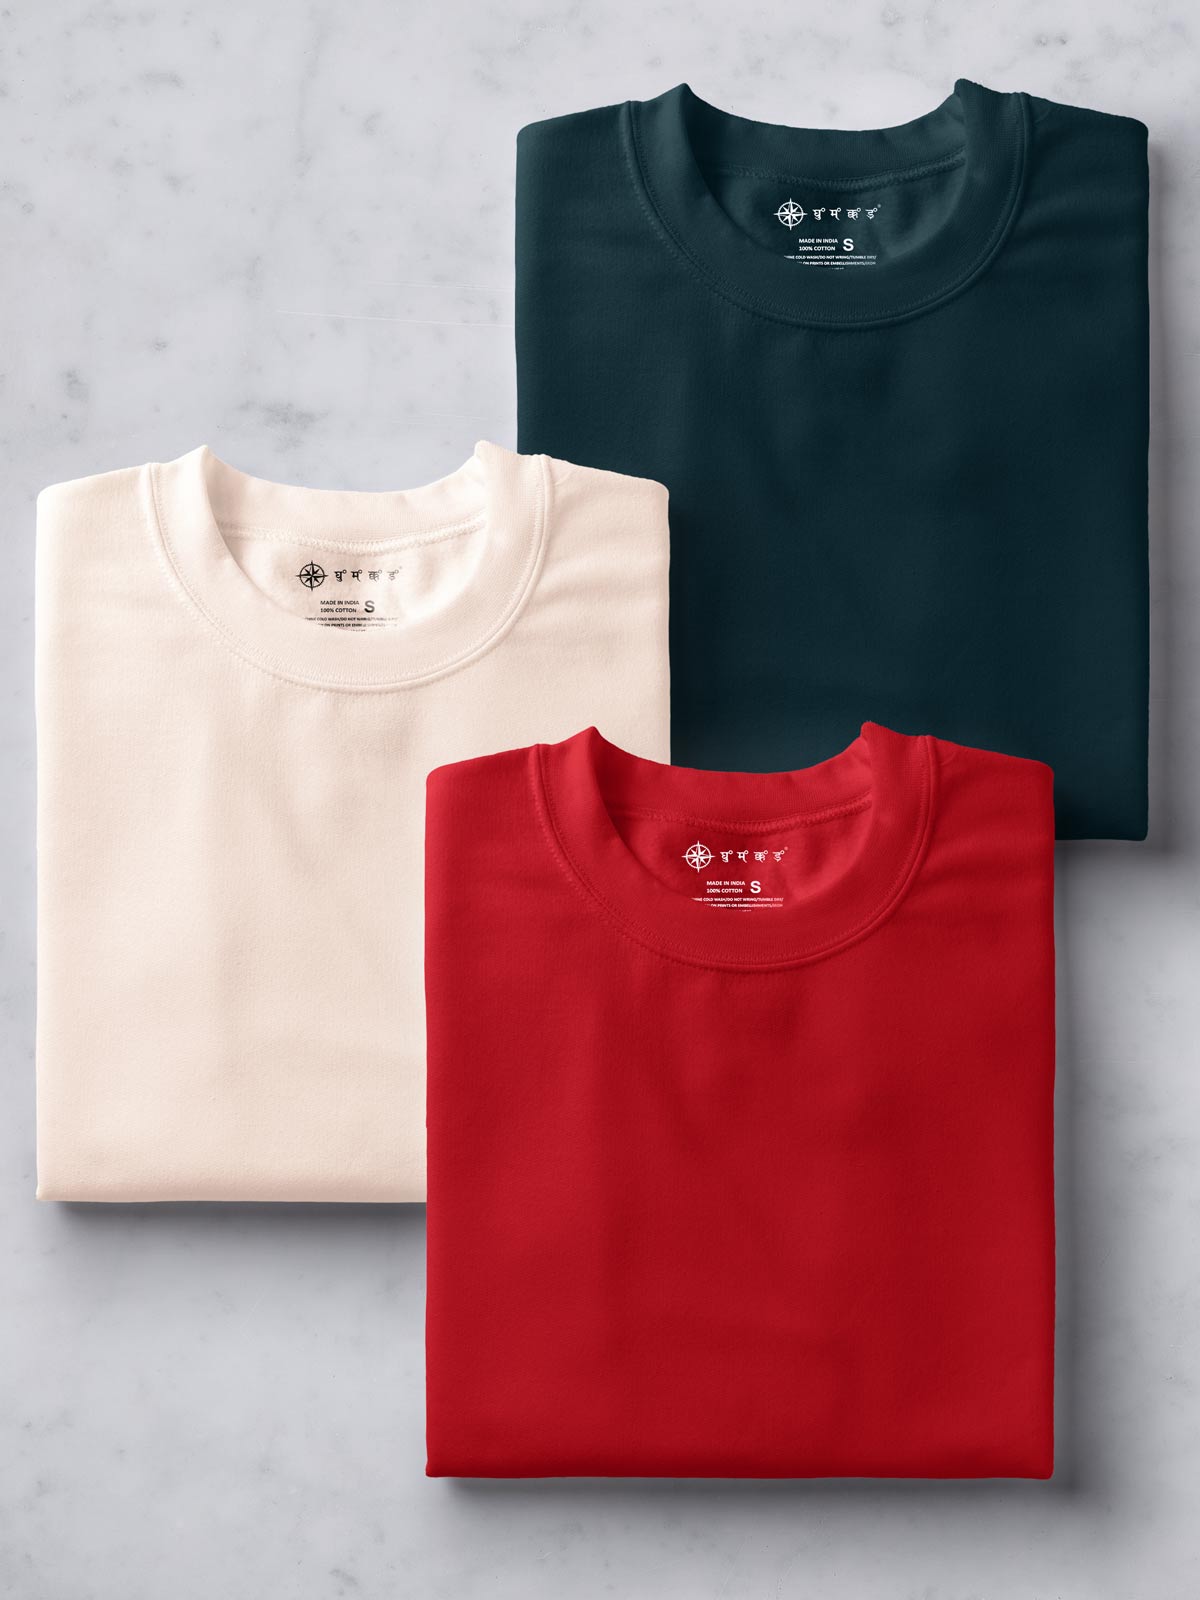 Pack of 3 | Teal Blue, Red & Muted Peach Unisex Plain T shirt